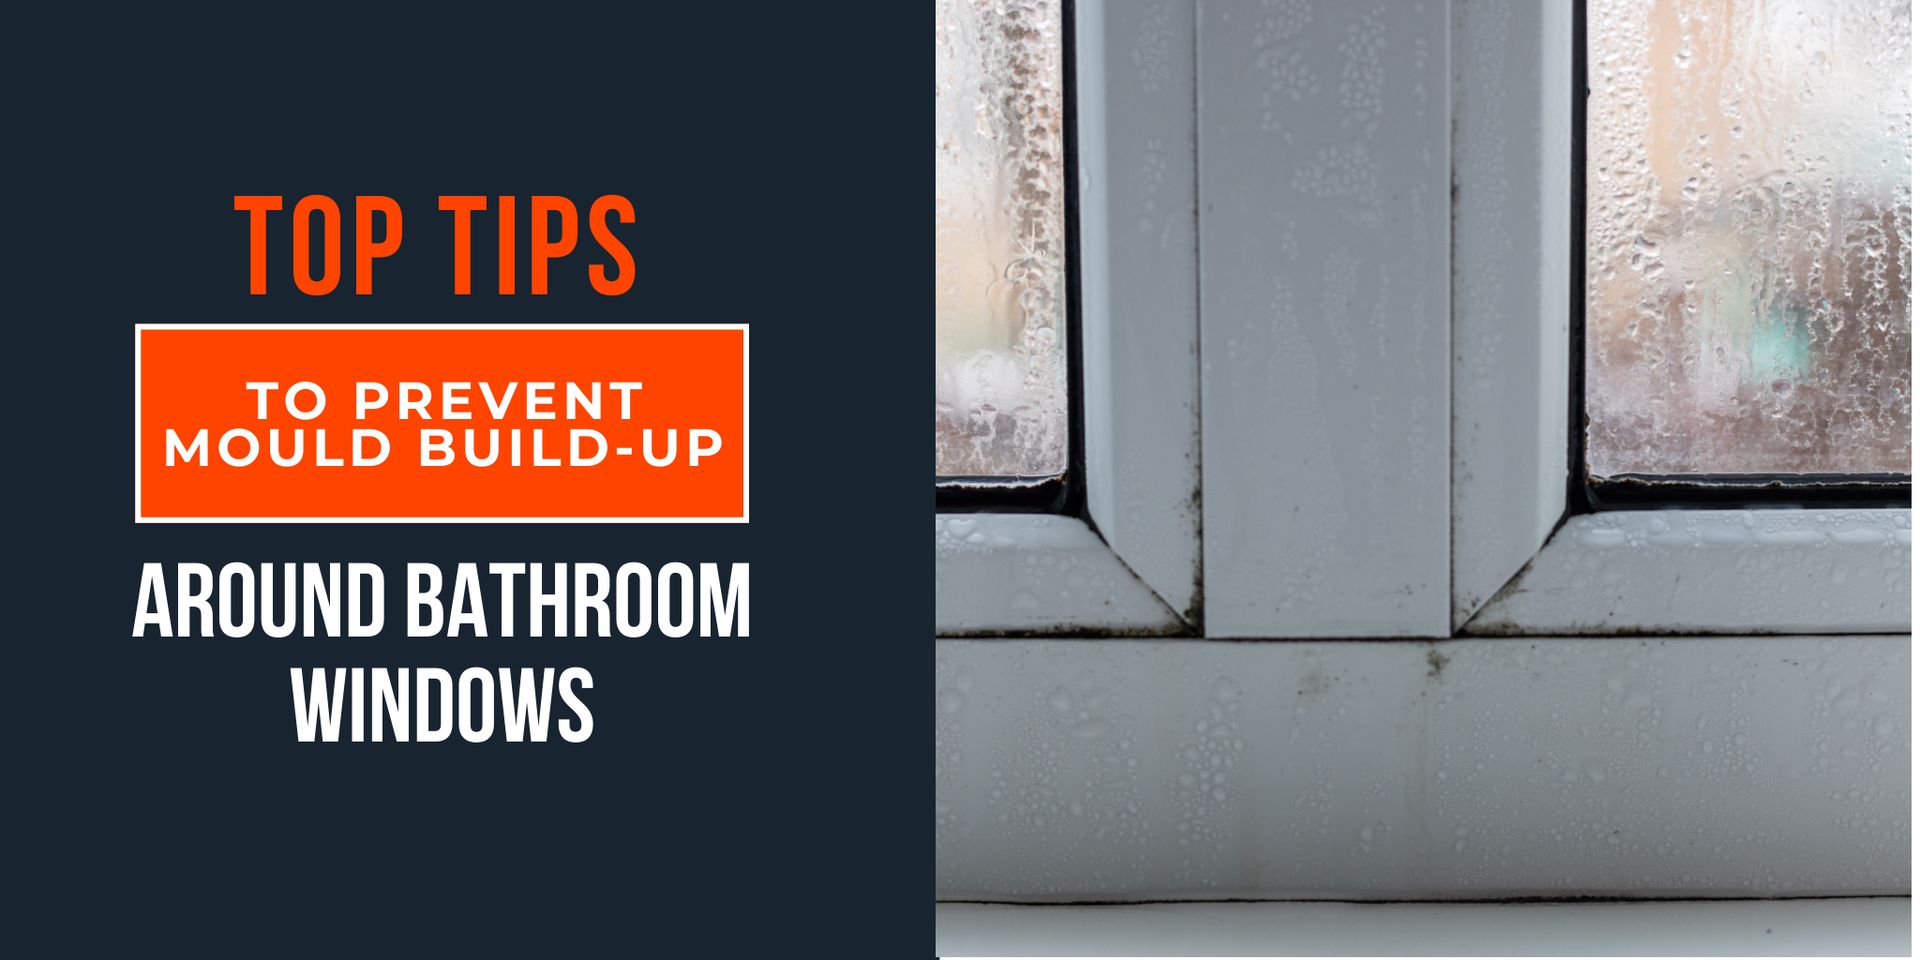 Top Tips to Prevent Mould Build-Up Around Bathroom Windows